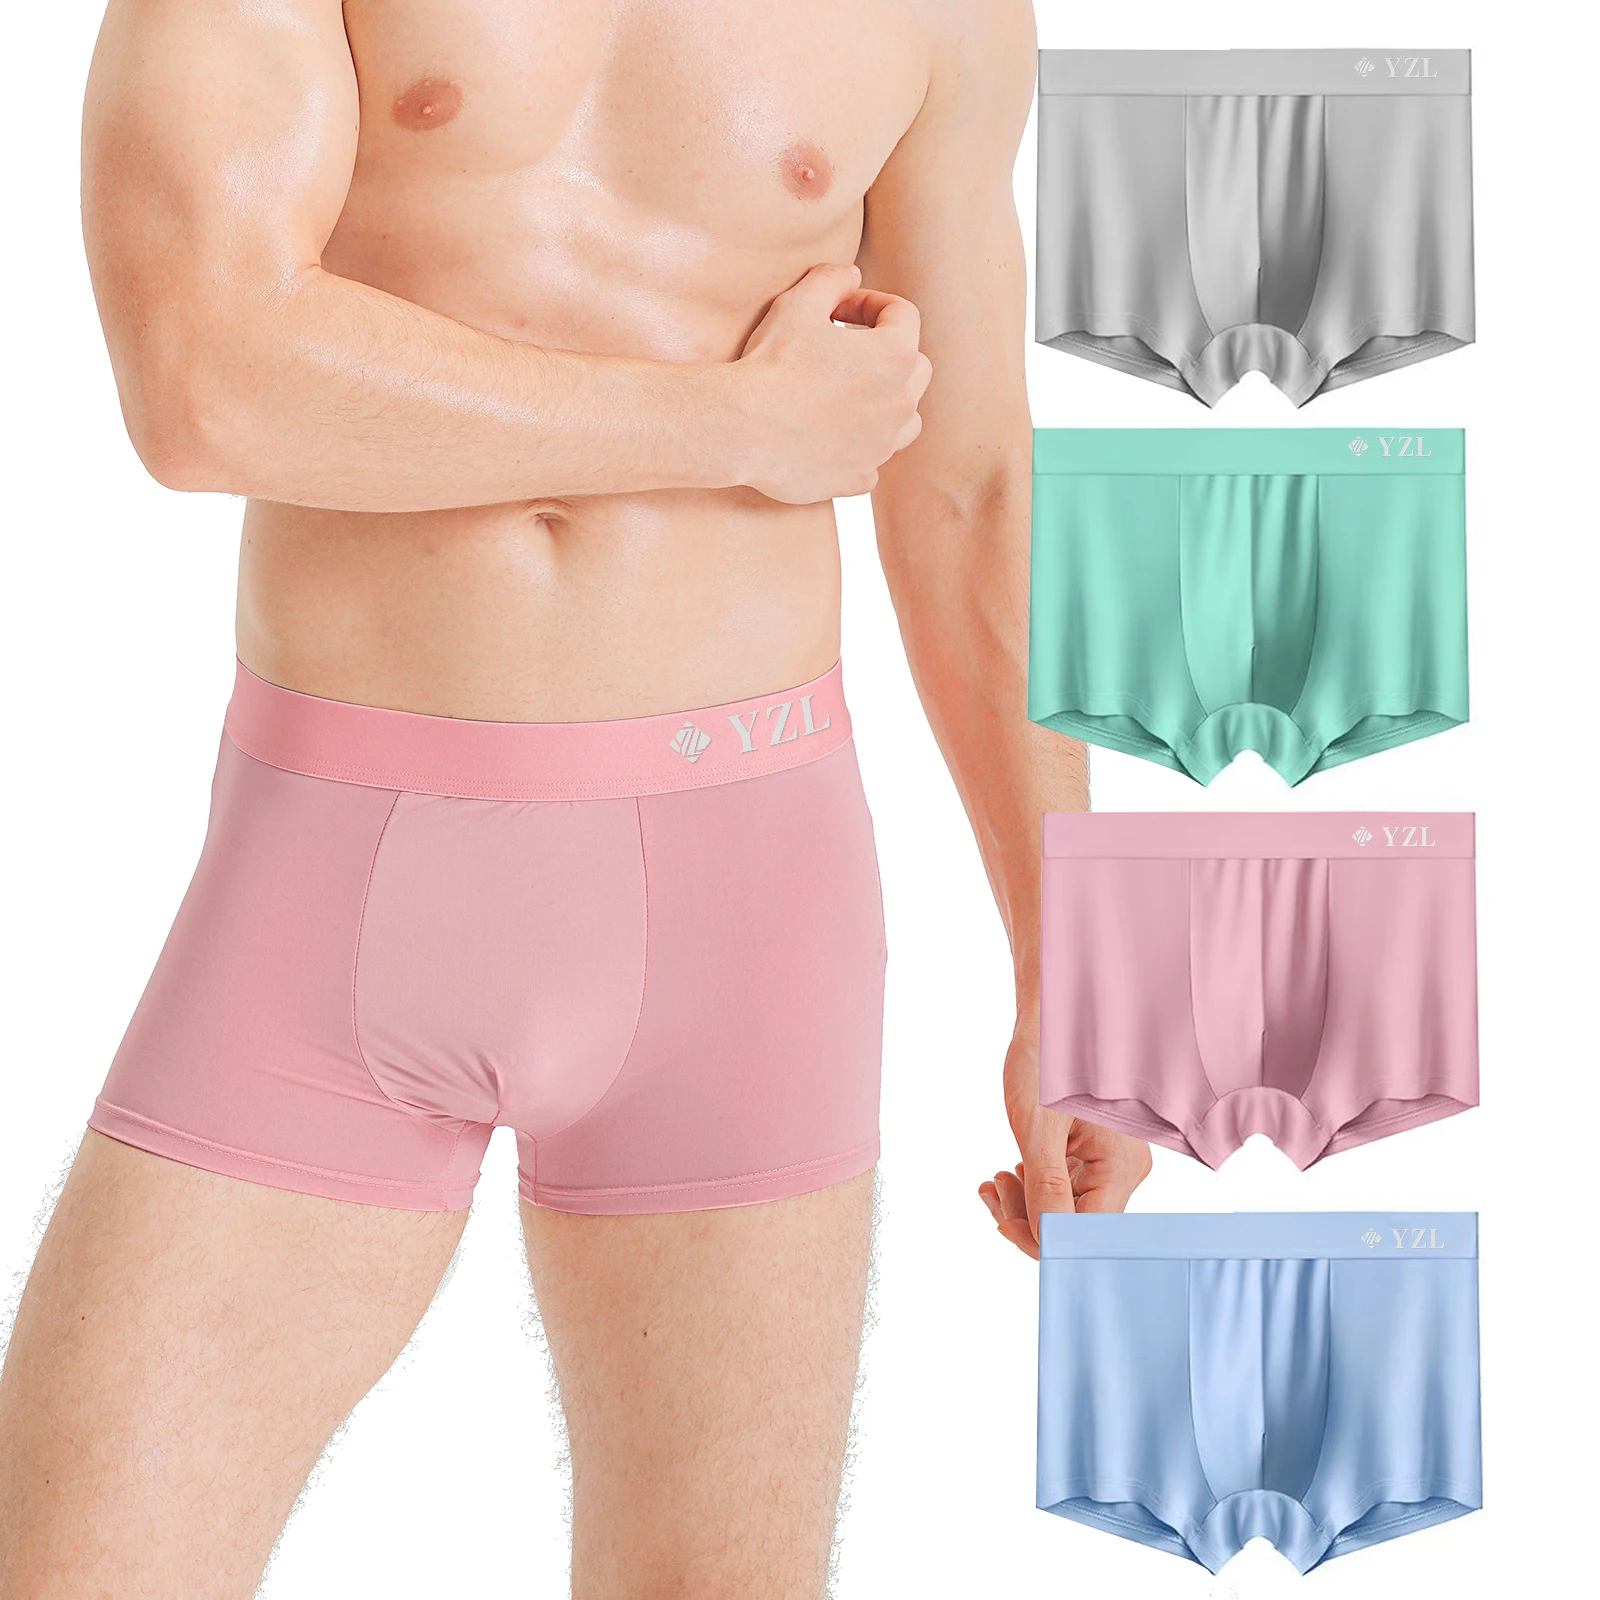 Men's Underwear ice Silk Flat Corner Shorts pants Summer Thin Antibacterial Modal Large Boys' Seamless Top Quality with Gift Box hot antibacterial wall paint waterbased repair paint latex paint white roller for graffiti covering the wall with roller paint